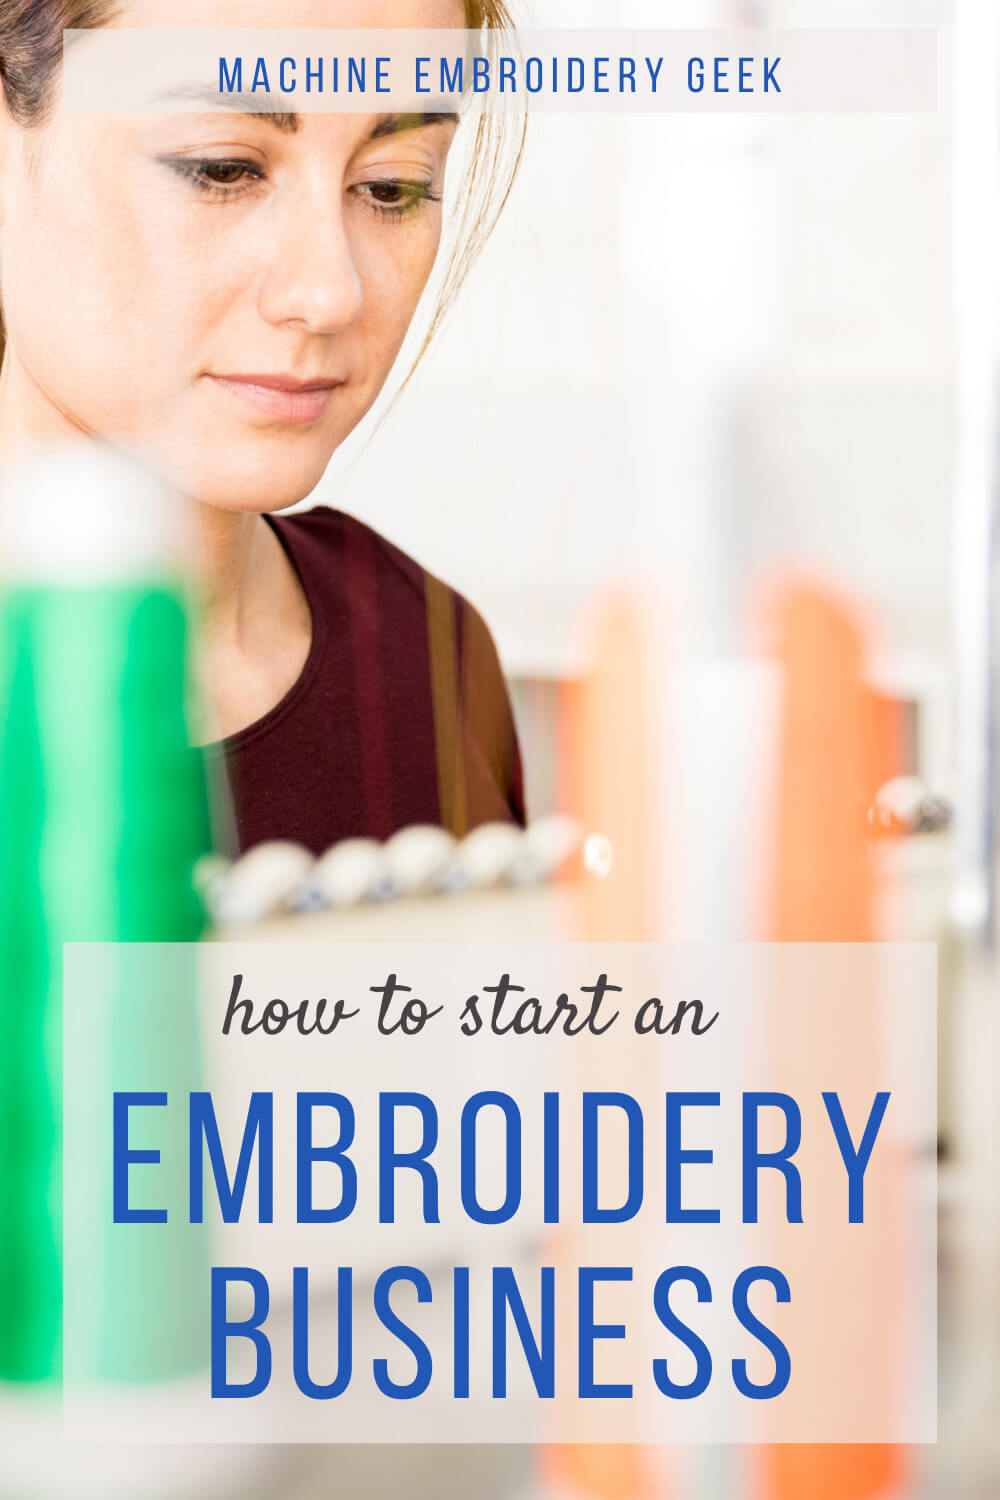 How to start a home embroidery business - Machine Embroidery Geek